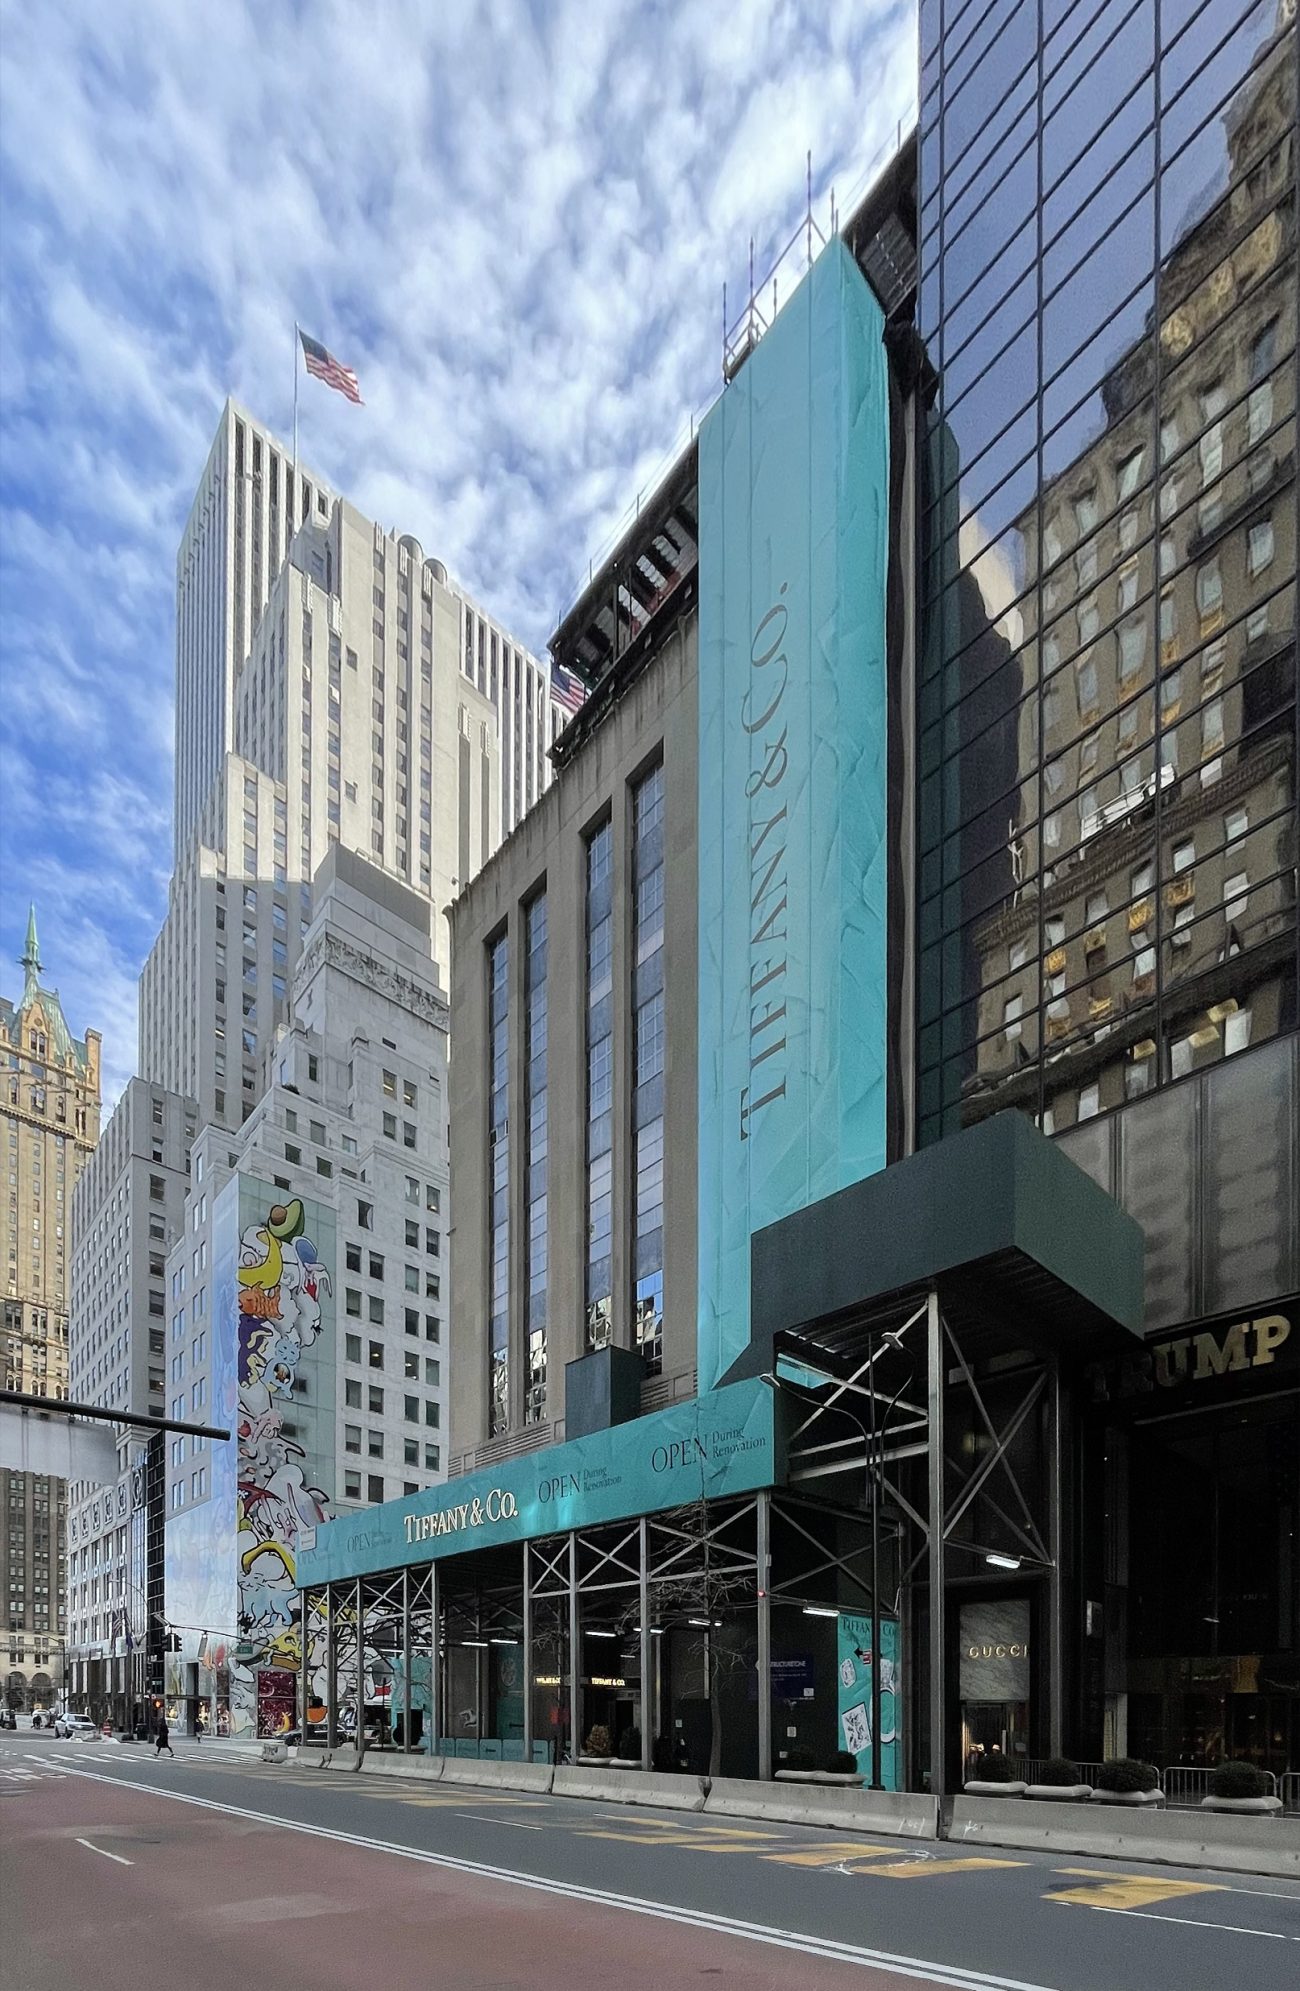 Tiffany & Co. Flagship store, with original upper volume built in 1980